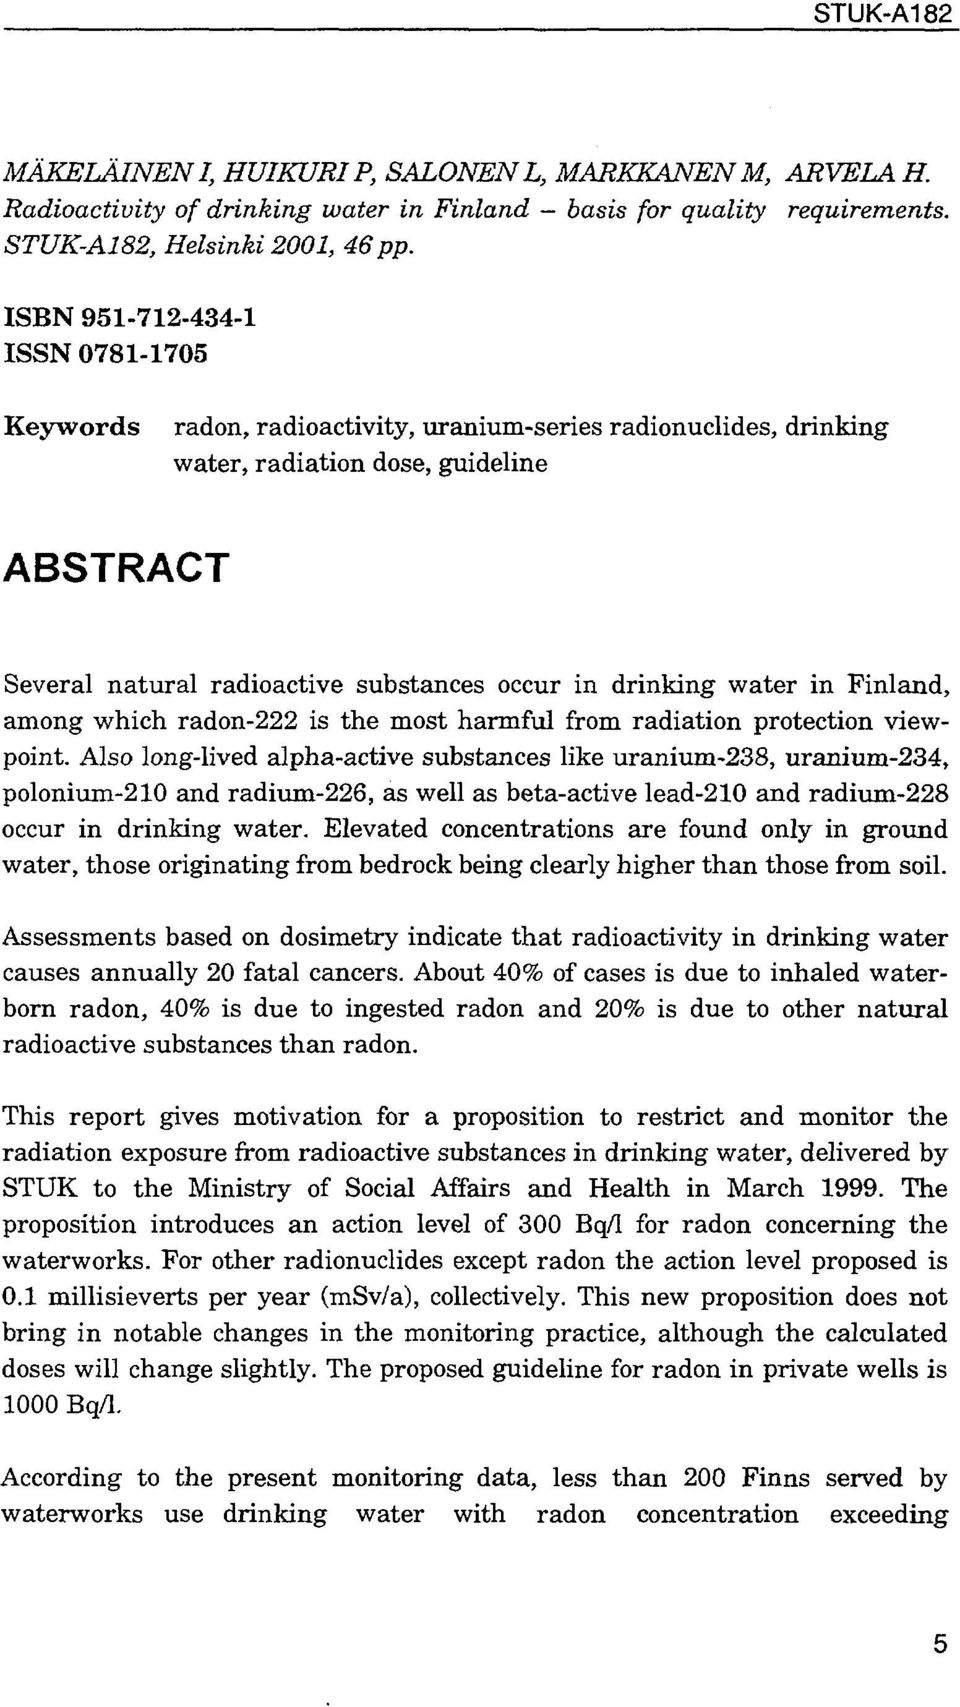 drinking water in Finland, among which radon-222 is the most harmful from radiation protection viewpoint.